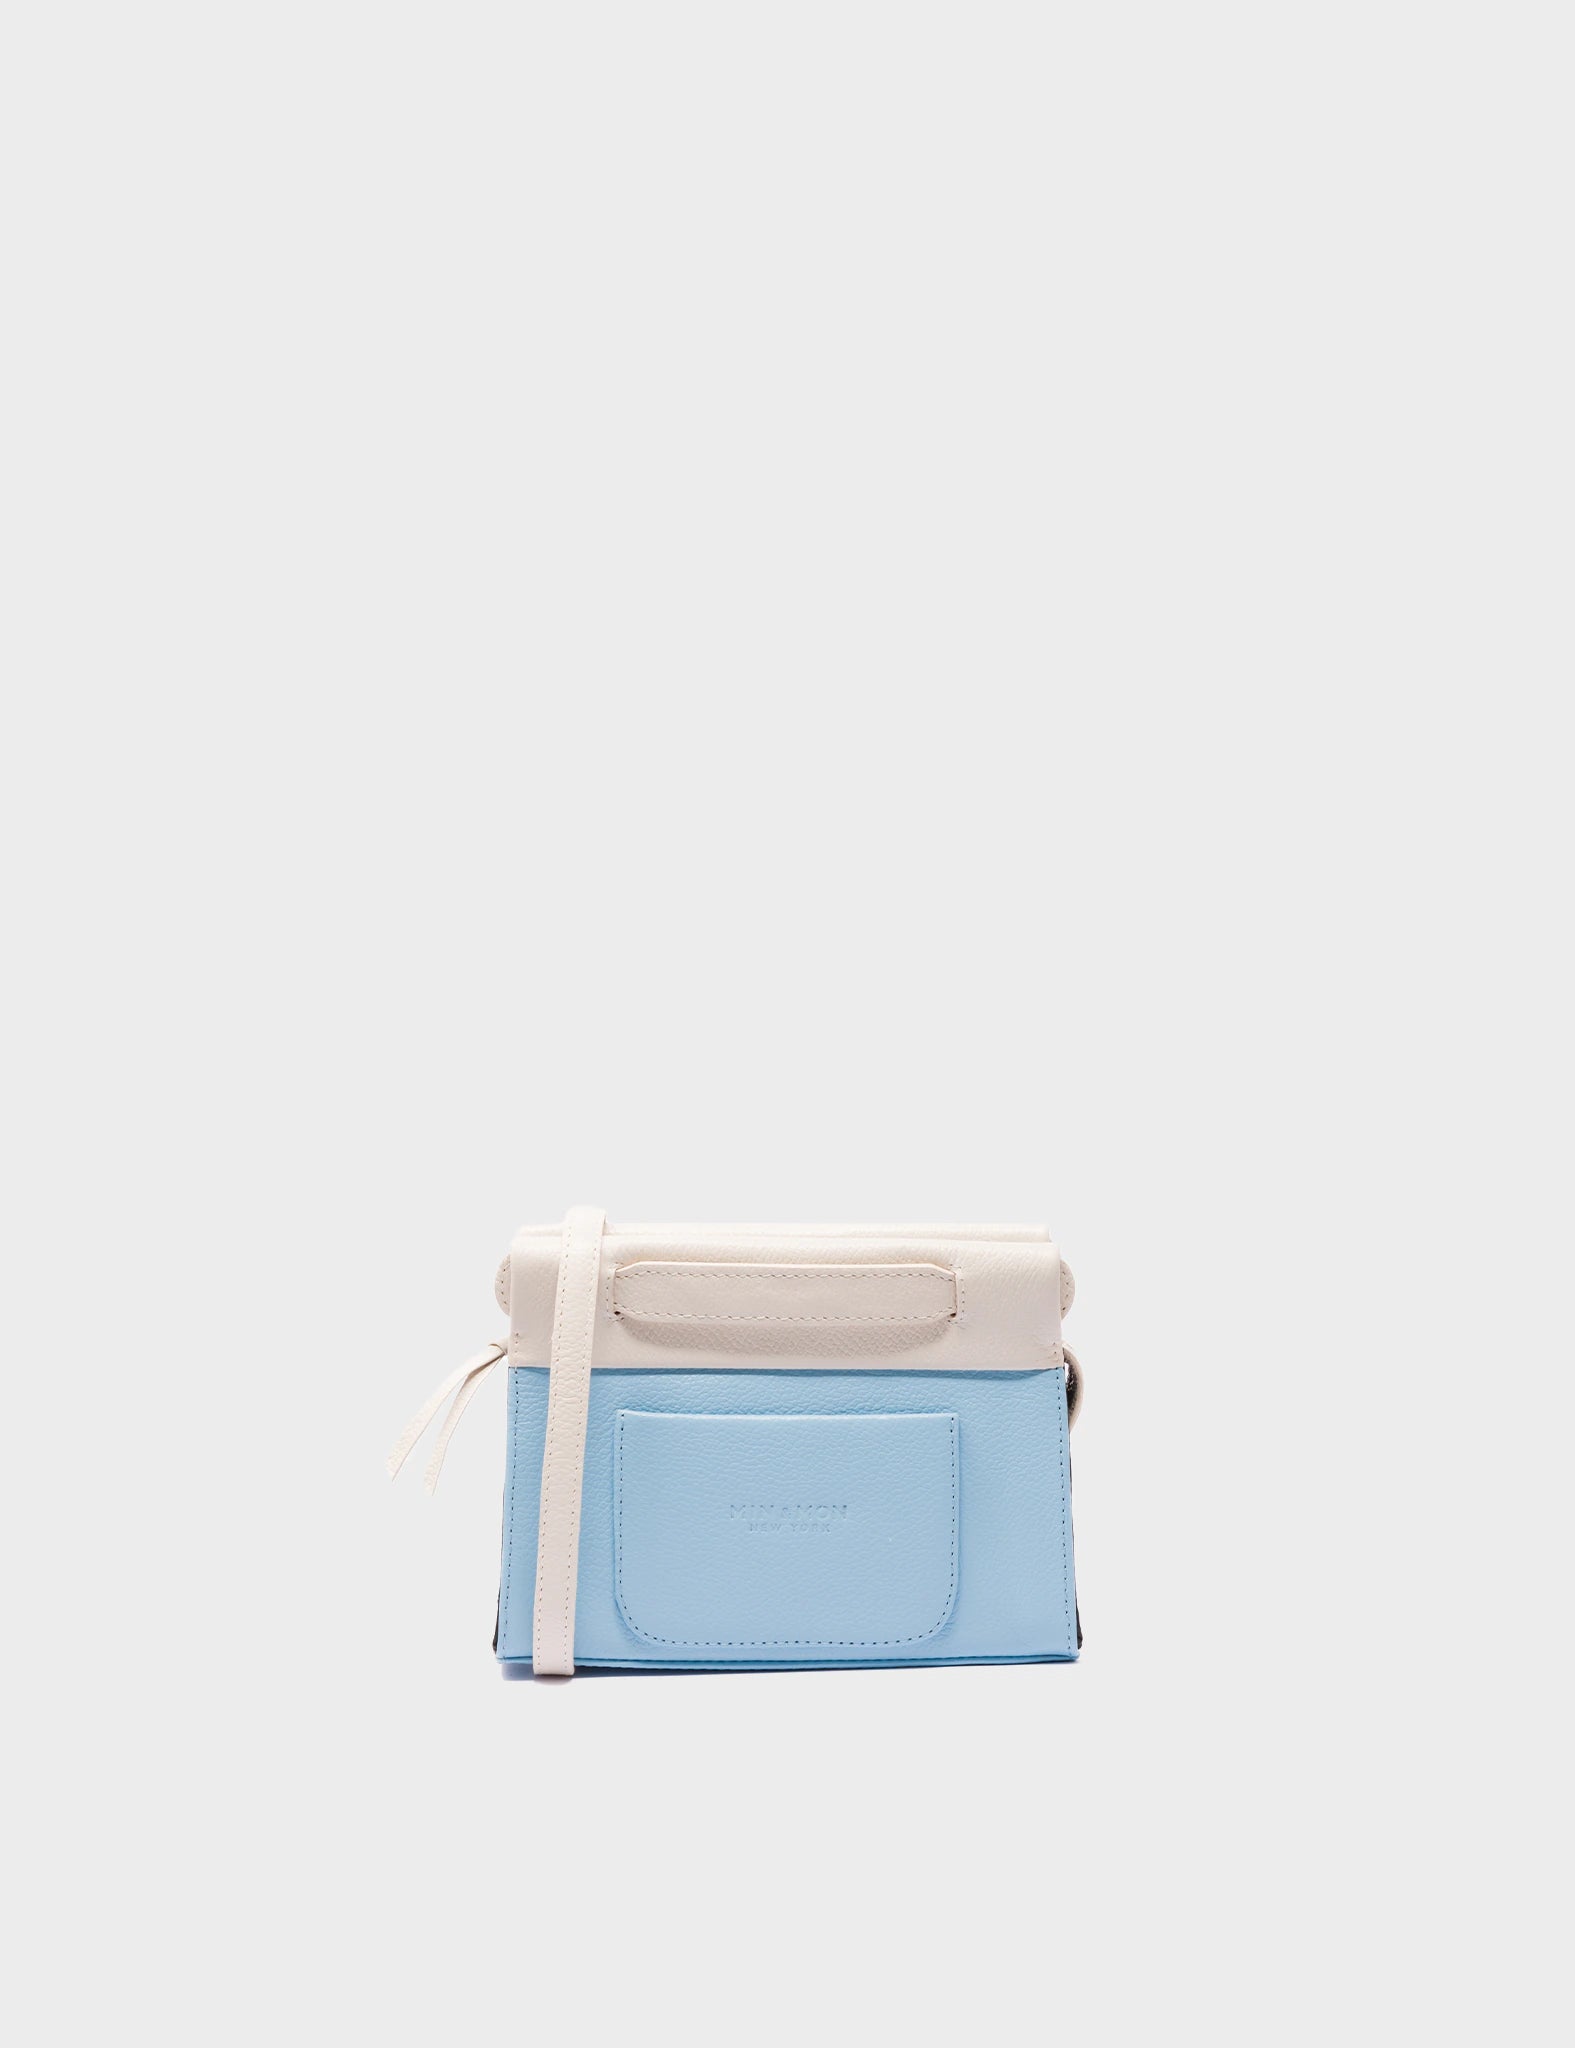 Crossbody Micro Blue Leather Bag - Clouds Embroidery - Back